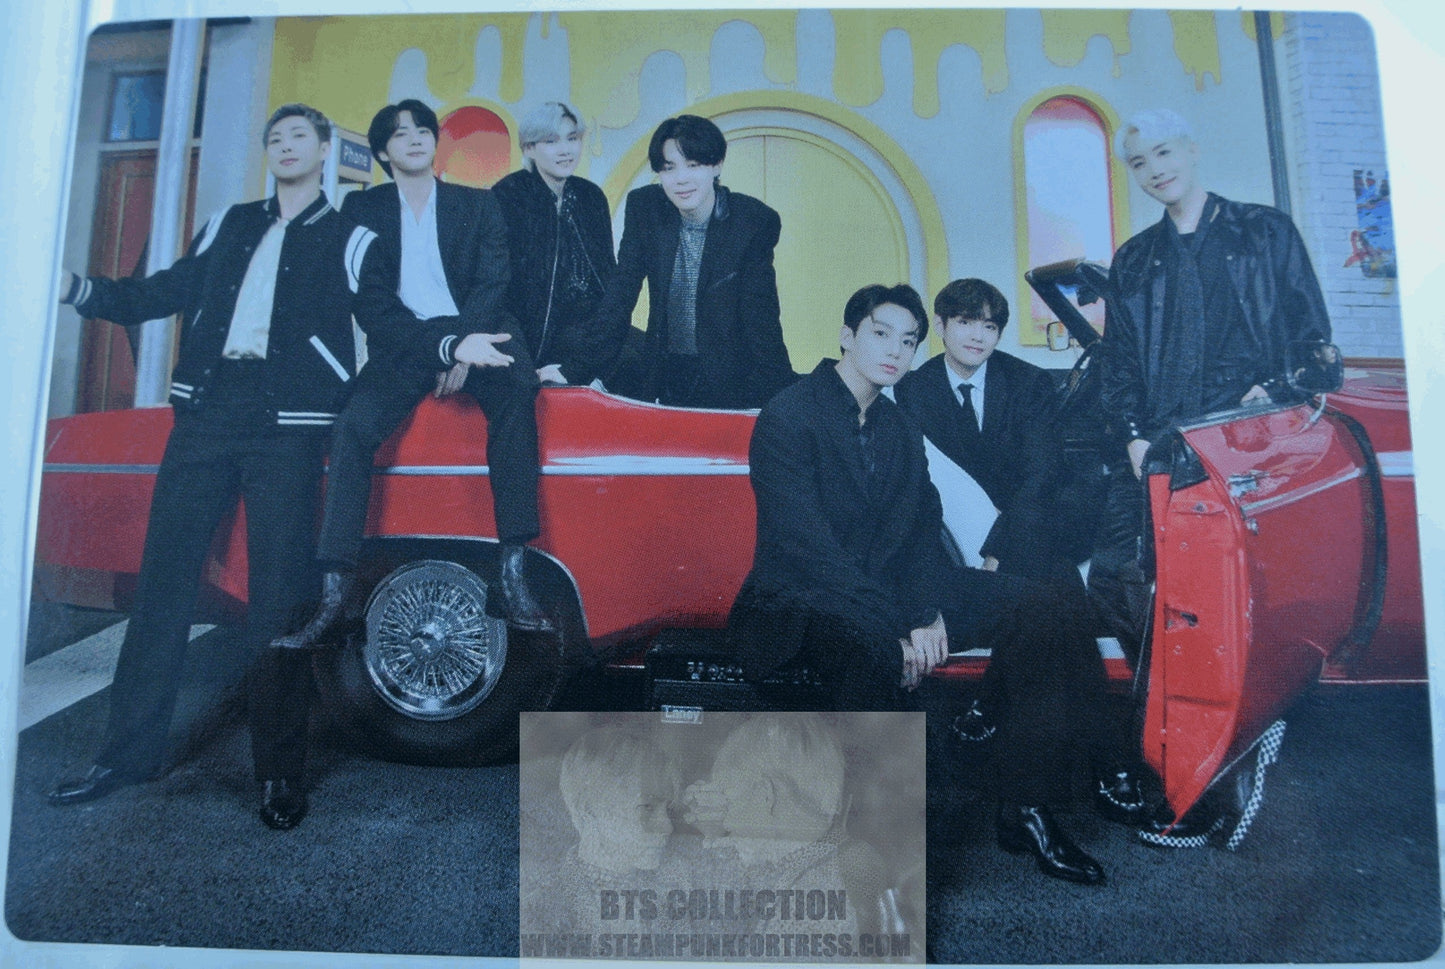 BTS PERMISSION TO DANCE PTD ON STAGE SEOUL JIN SUGA J-HOPE RM JIMIN V JUNGKOOK GROUP #1 OF 2 LIMITED EDITION PHOTOCARD PHOTO CARD PC NEW OFFICIAL MERCHANDISE